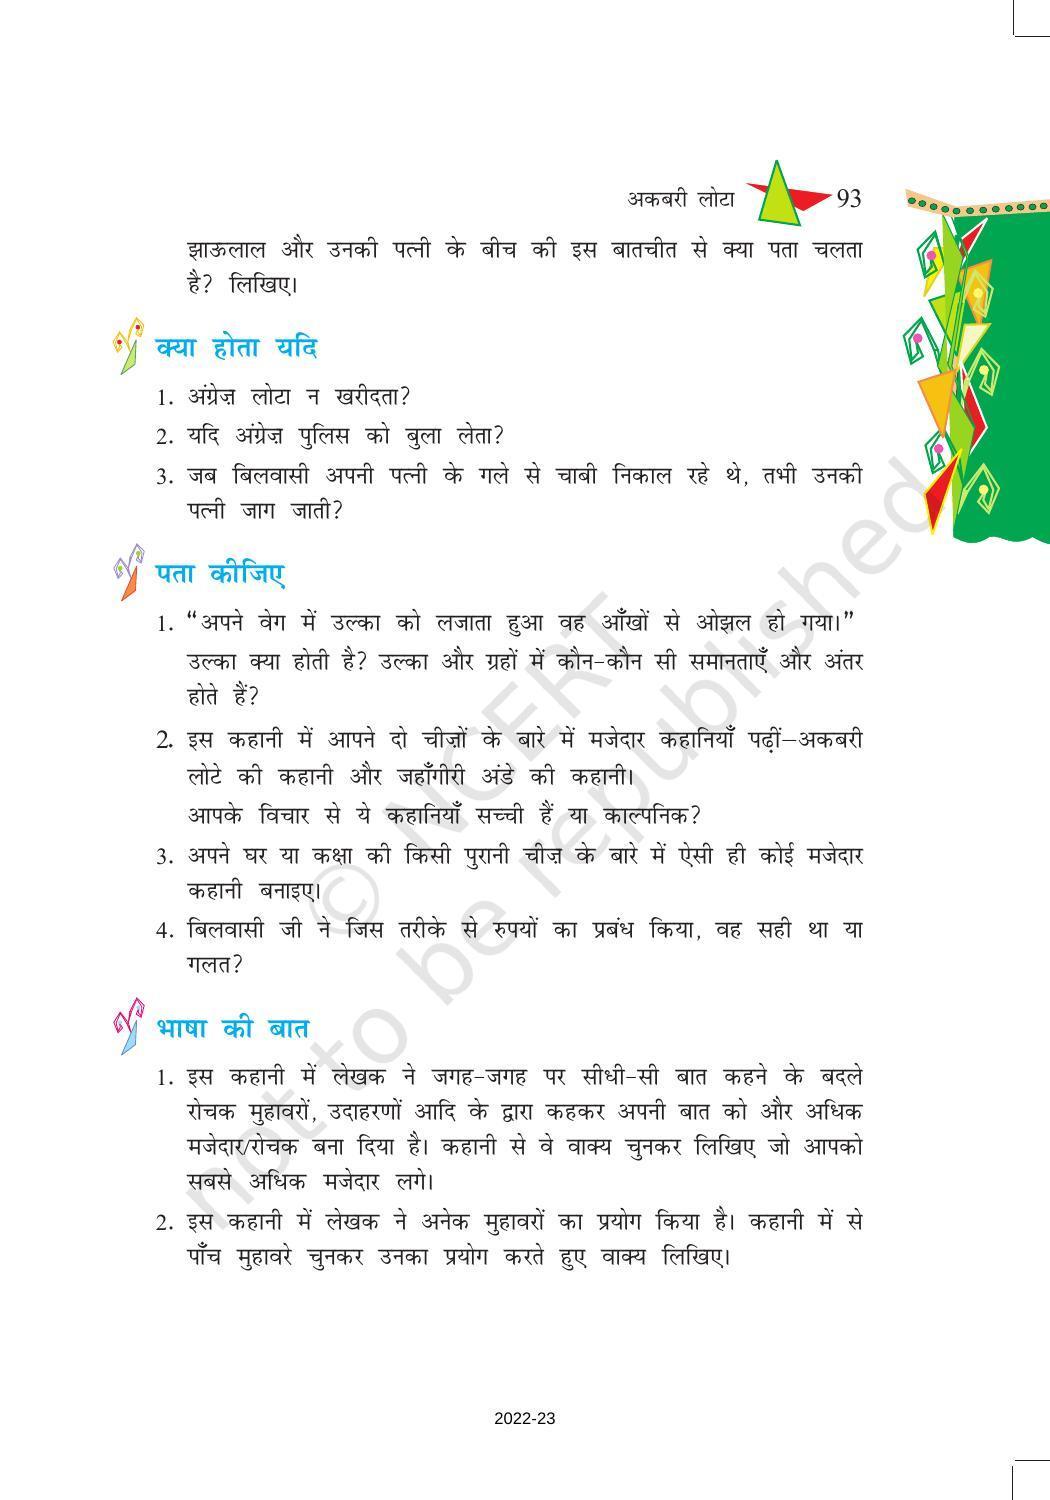 NCERT Book for Class 8 Hindi Vasant Chapter 14 अकबरी लोटा - Page 11